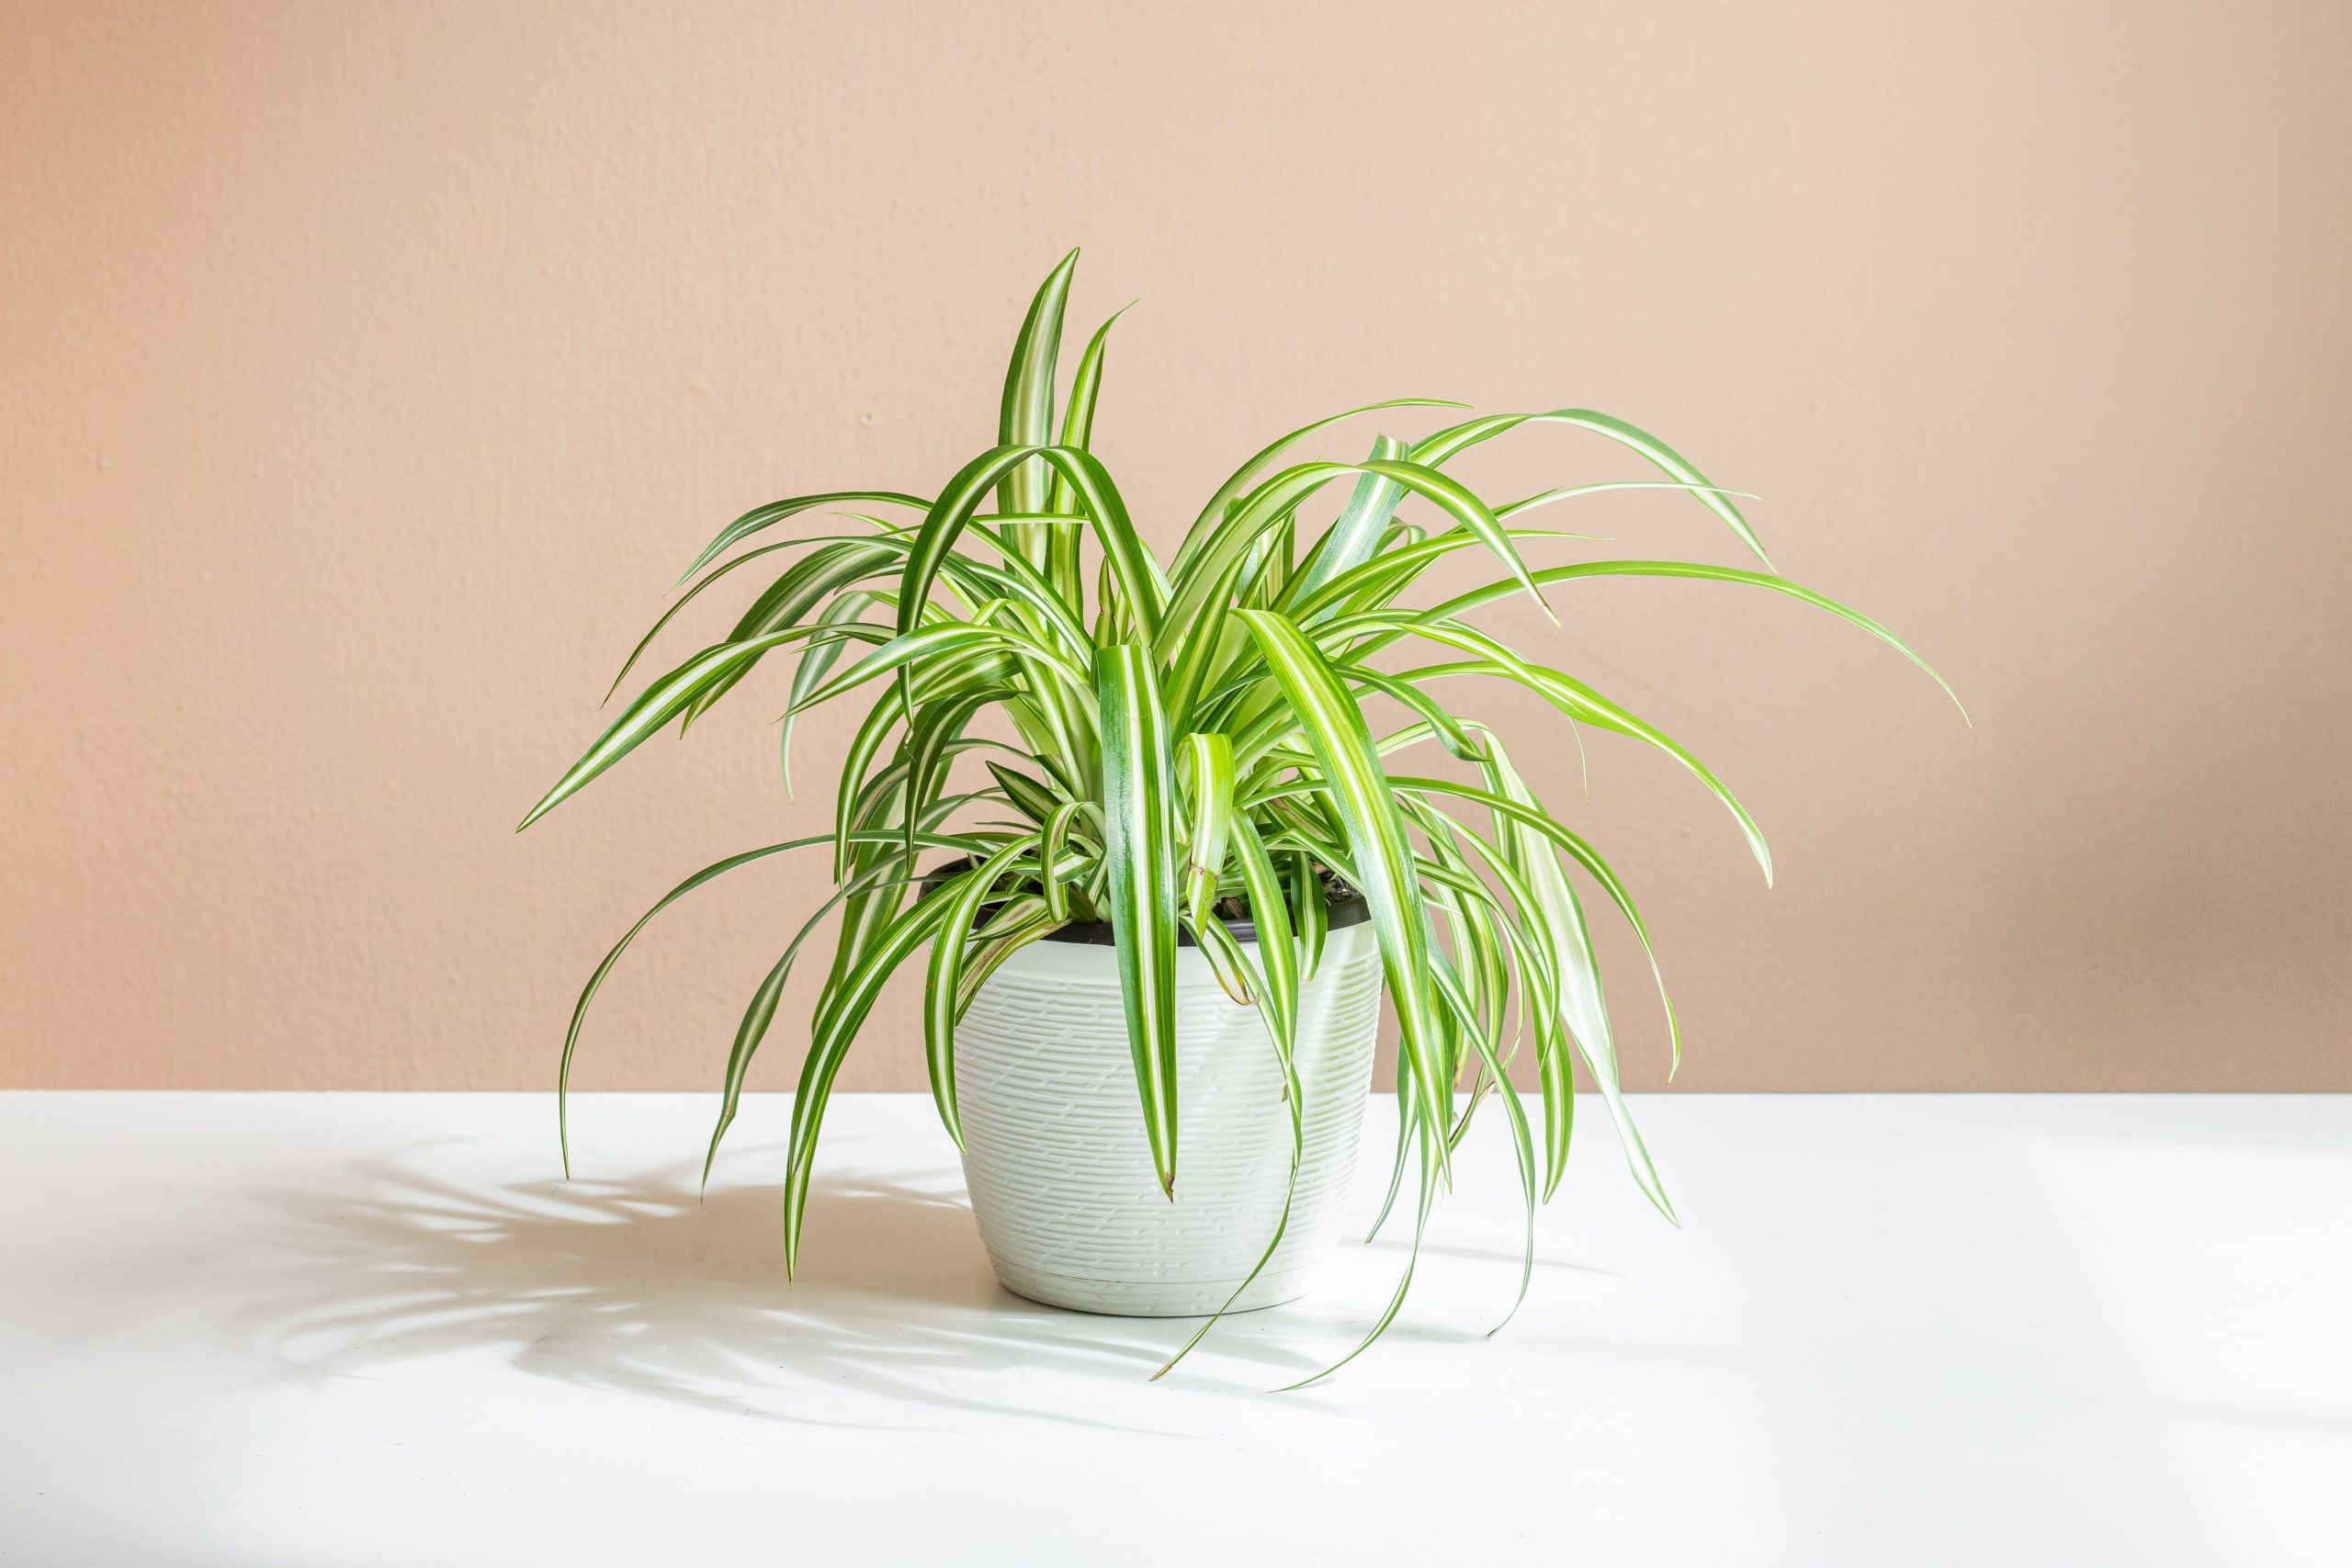 What Is The Green Plant That Looks Like A Spider Plant?